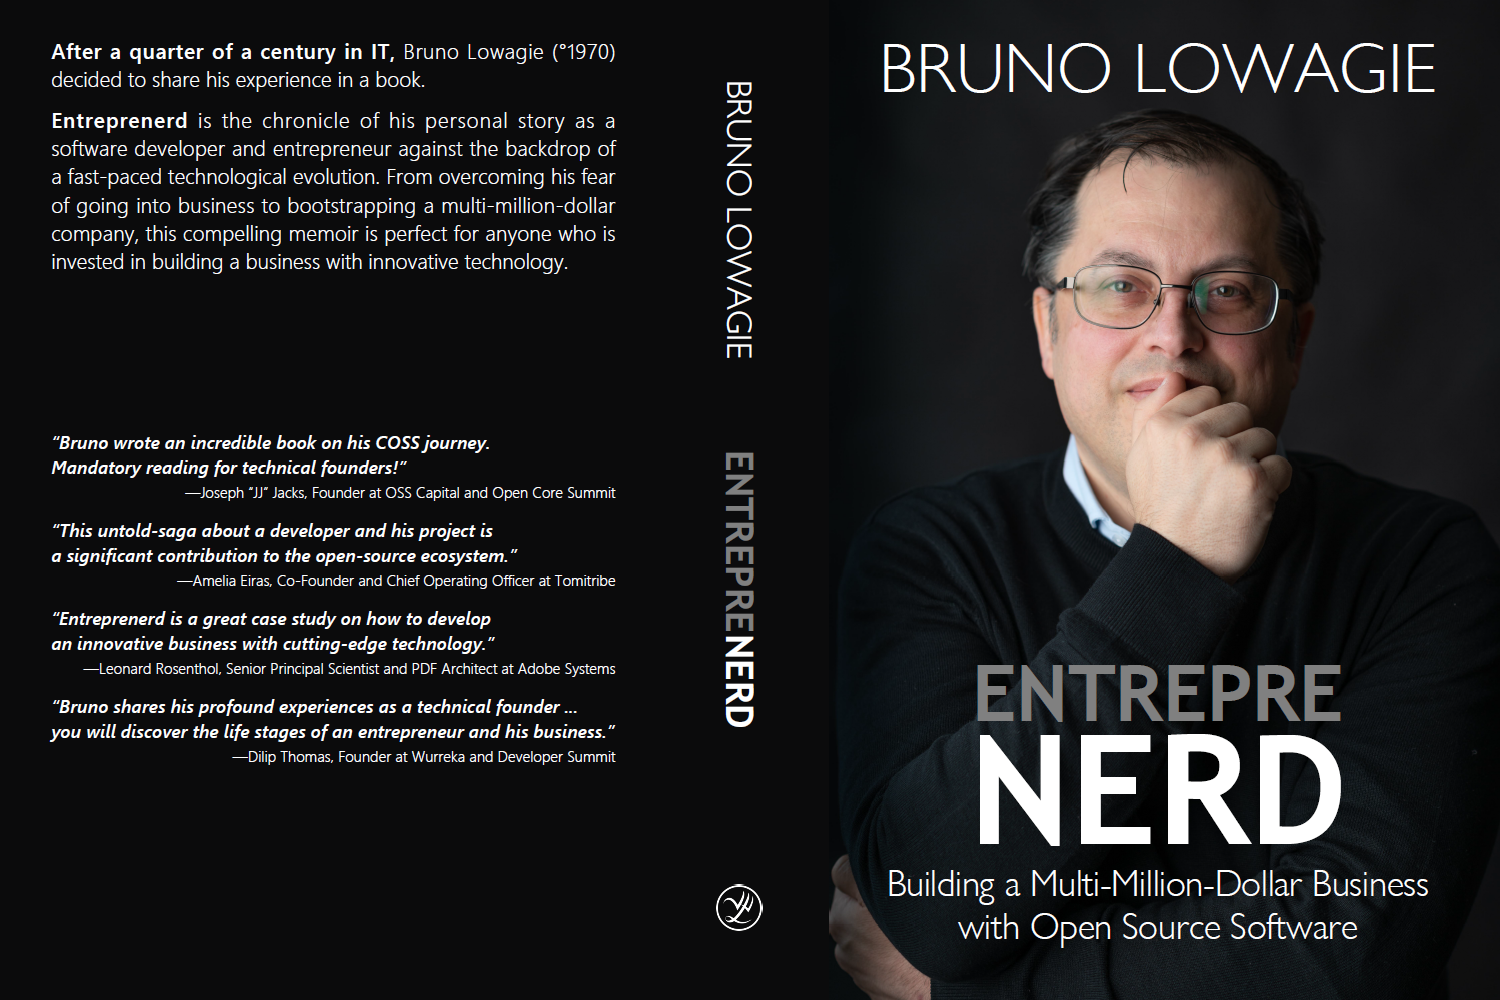 Entreprenerd: Building a Multi-Million-Dollar Business with Open Source Software